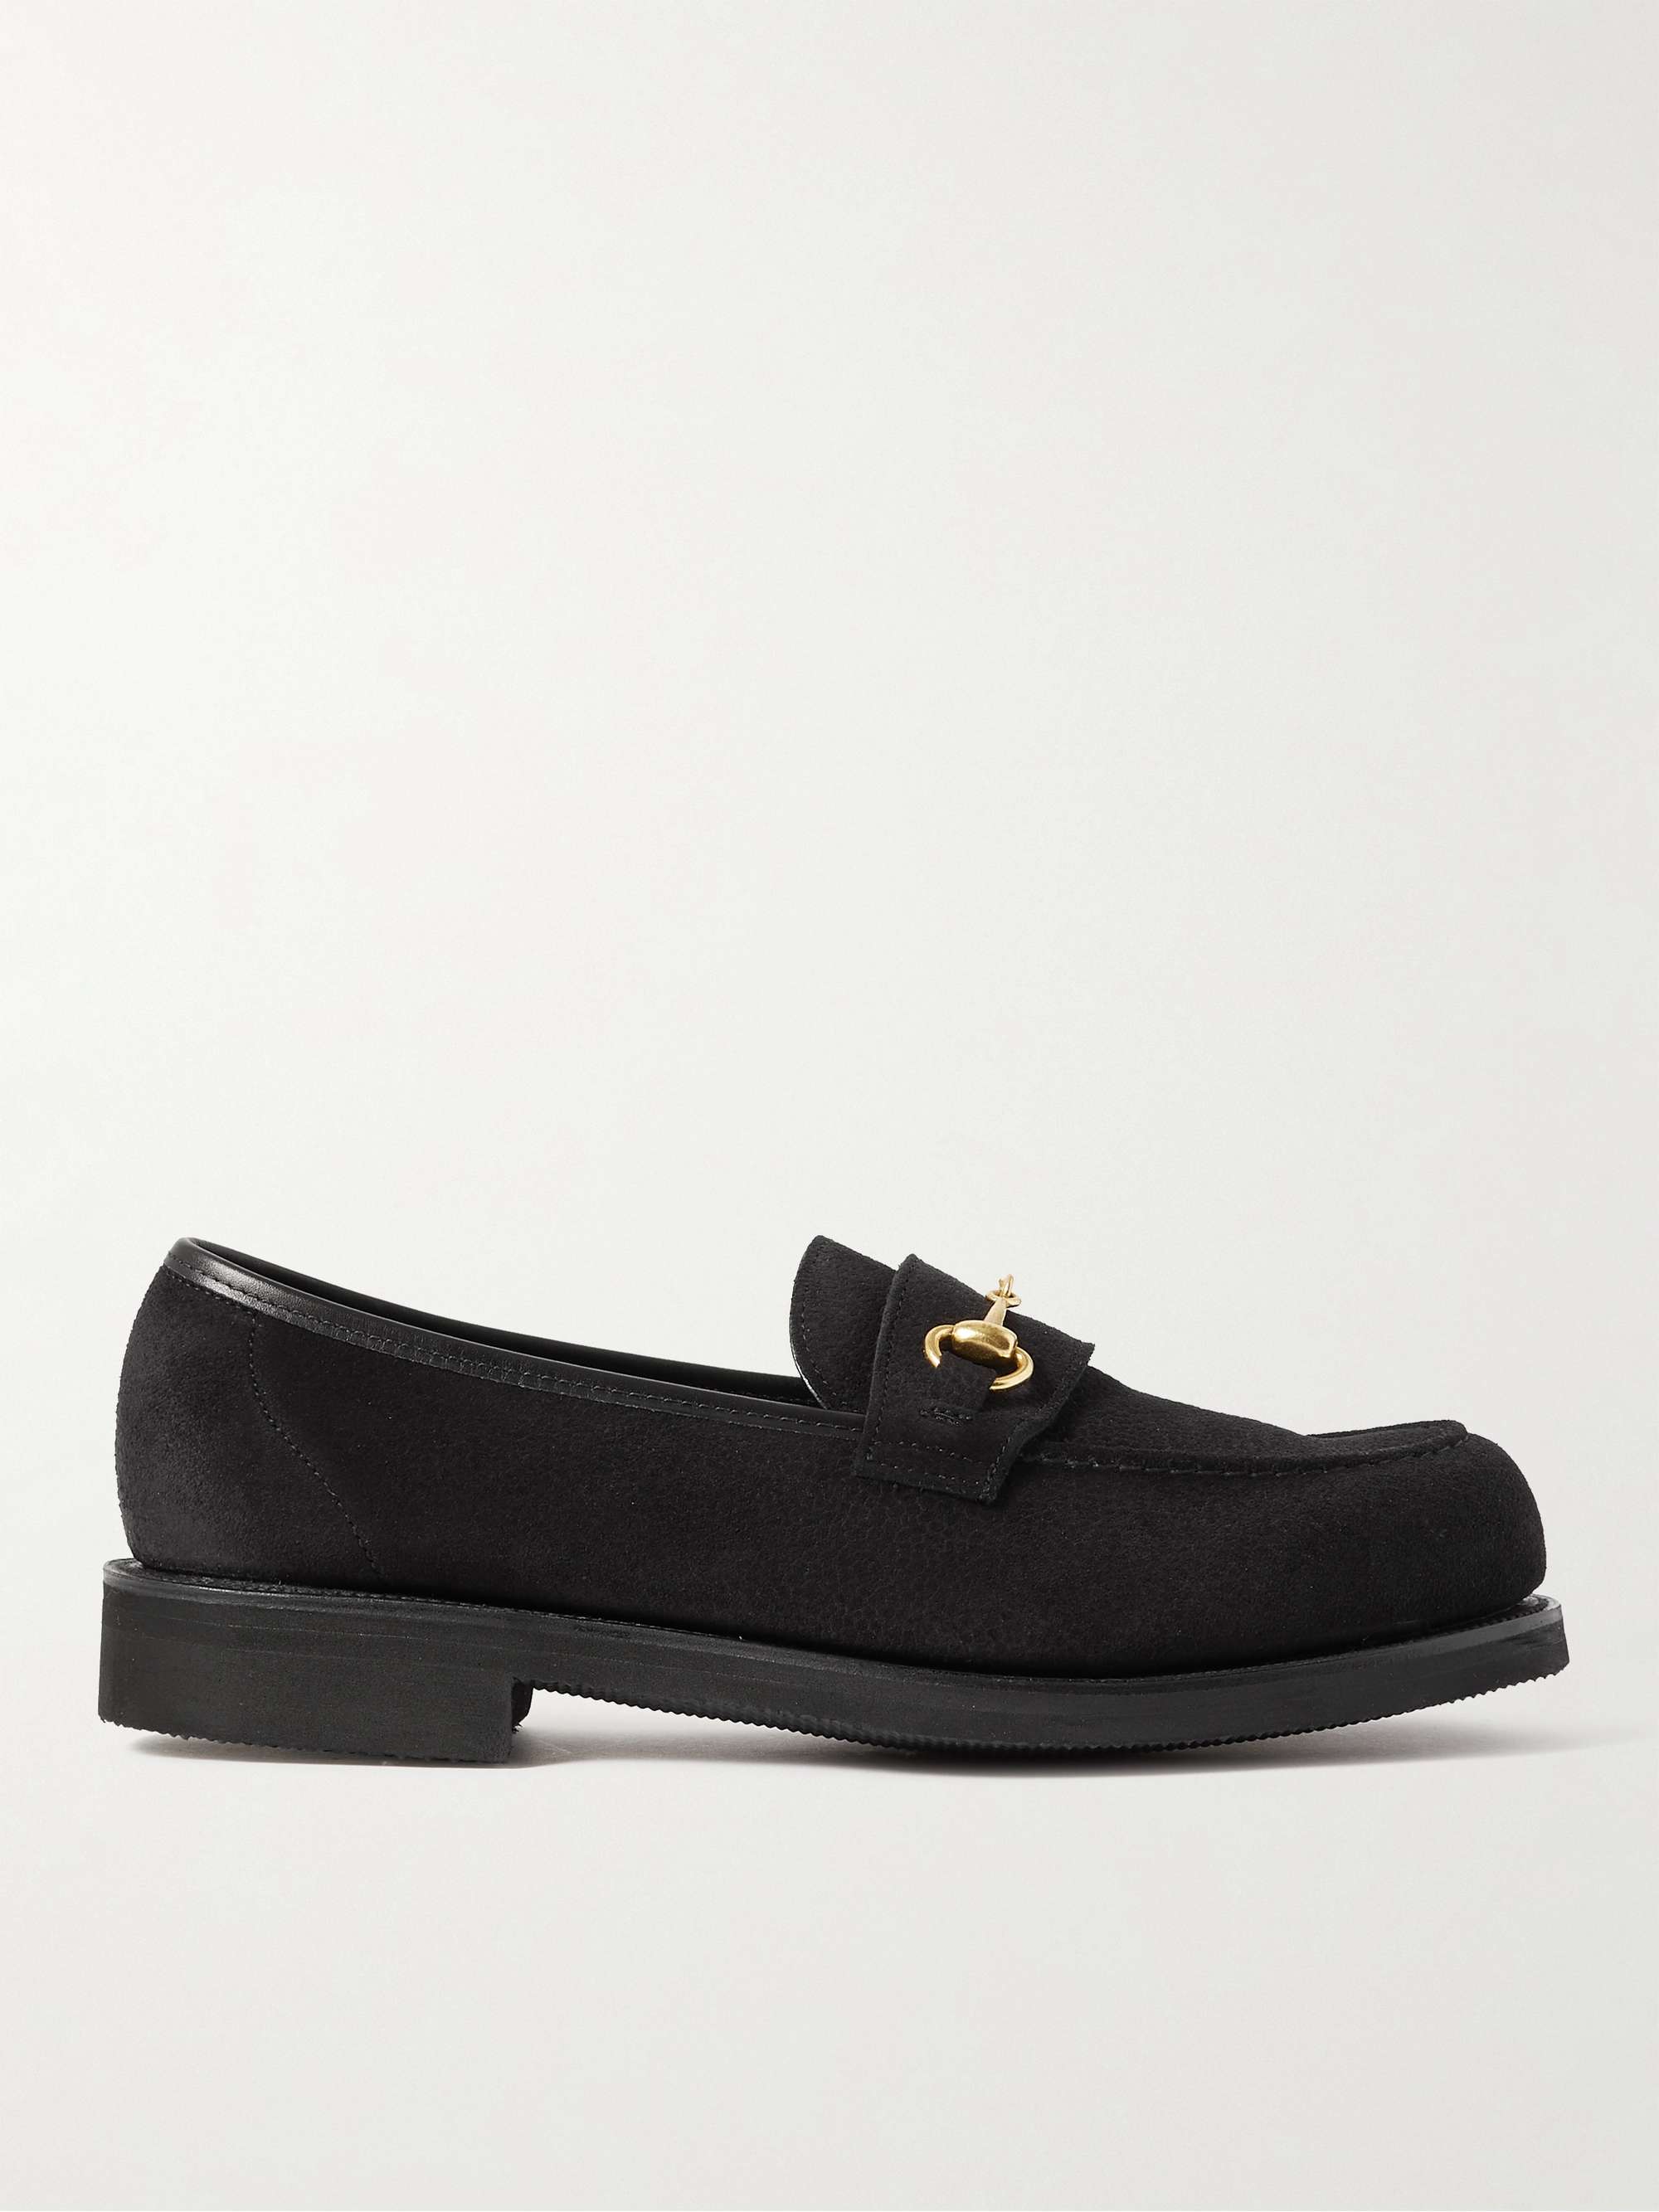 GEORGE CLEVERLEY Colony Full-Grain Suede Loafers